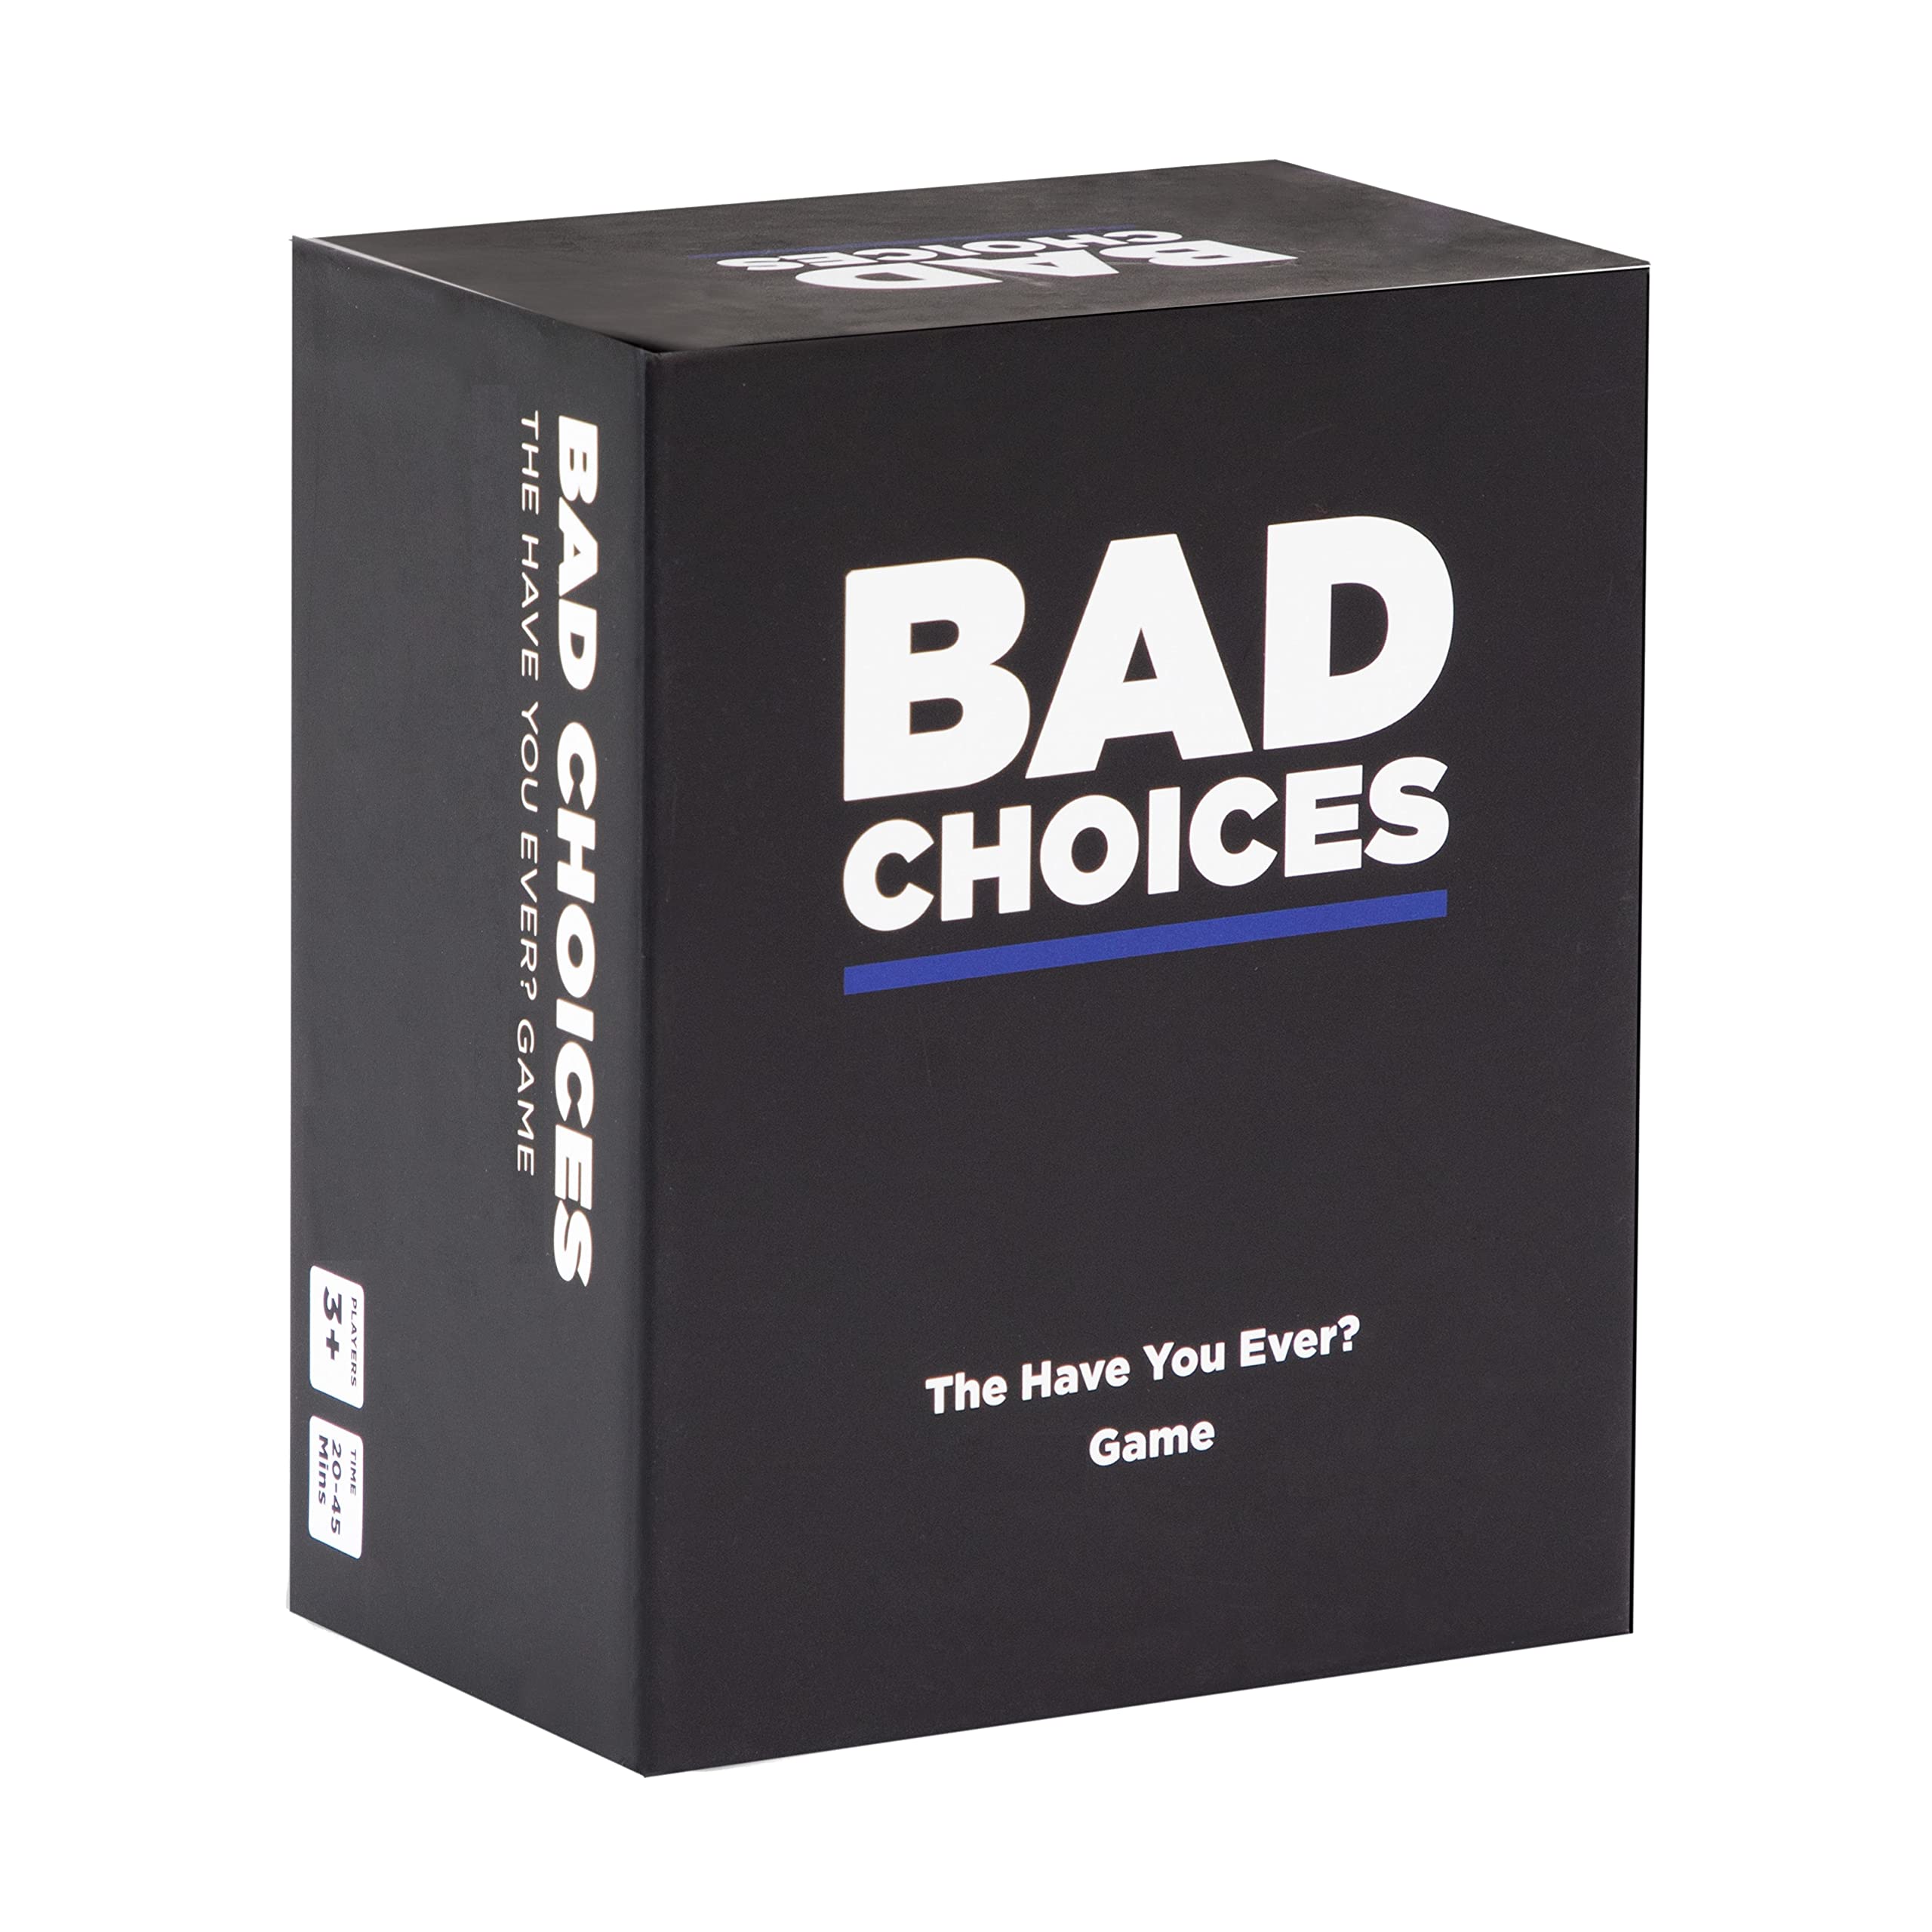 BAD cHOIcES - The Have You Ever game